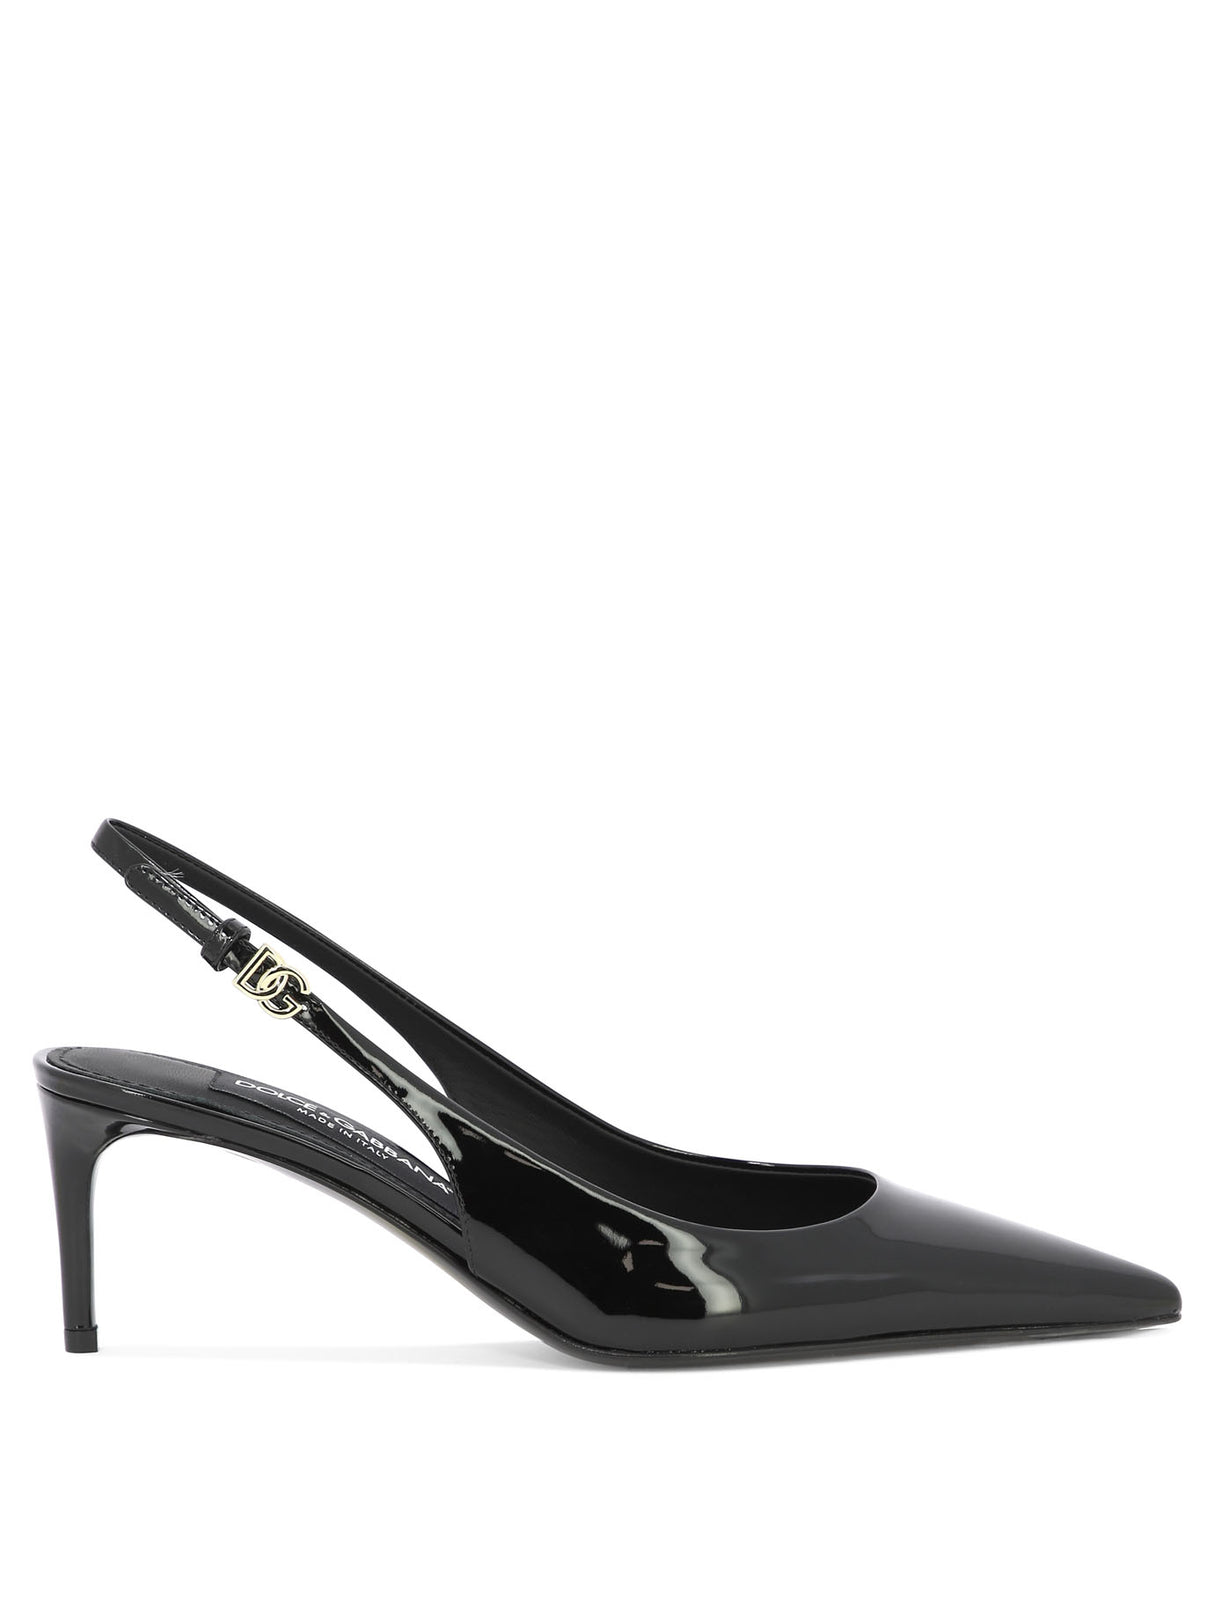 DOLCE & GABBANA Black Patent Leather Slingbacks for Women - SS24 Collection